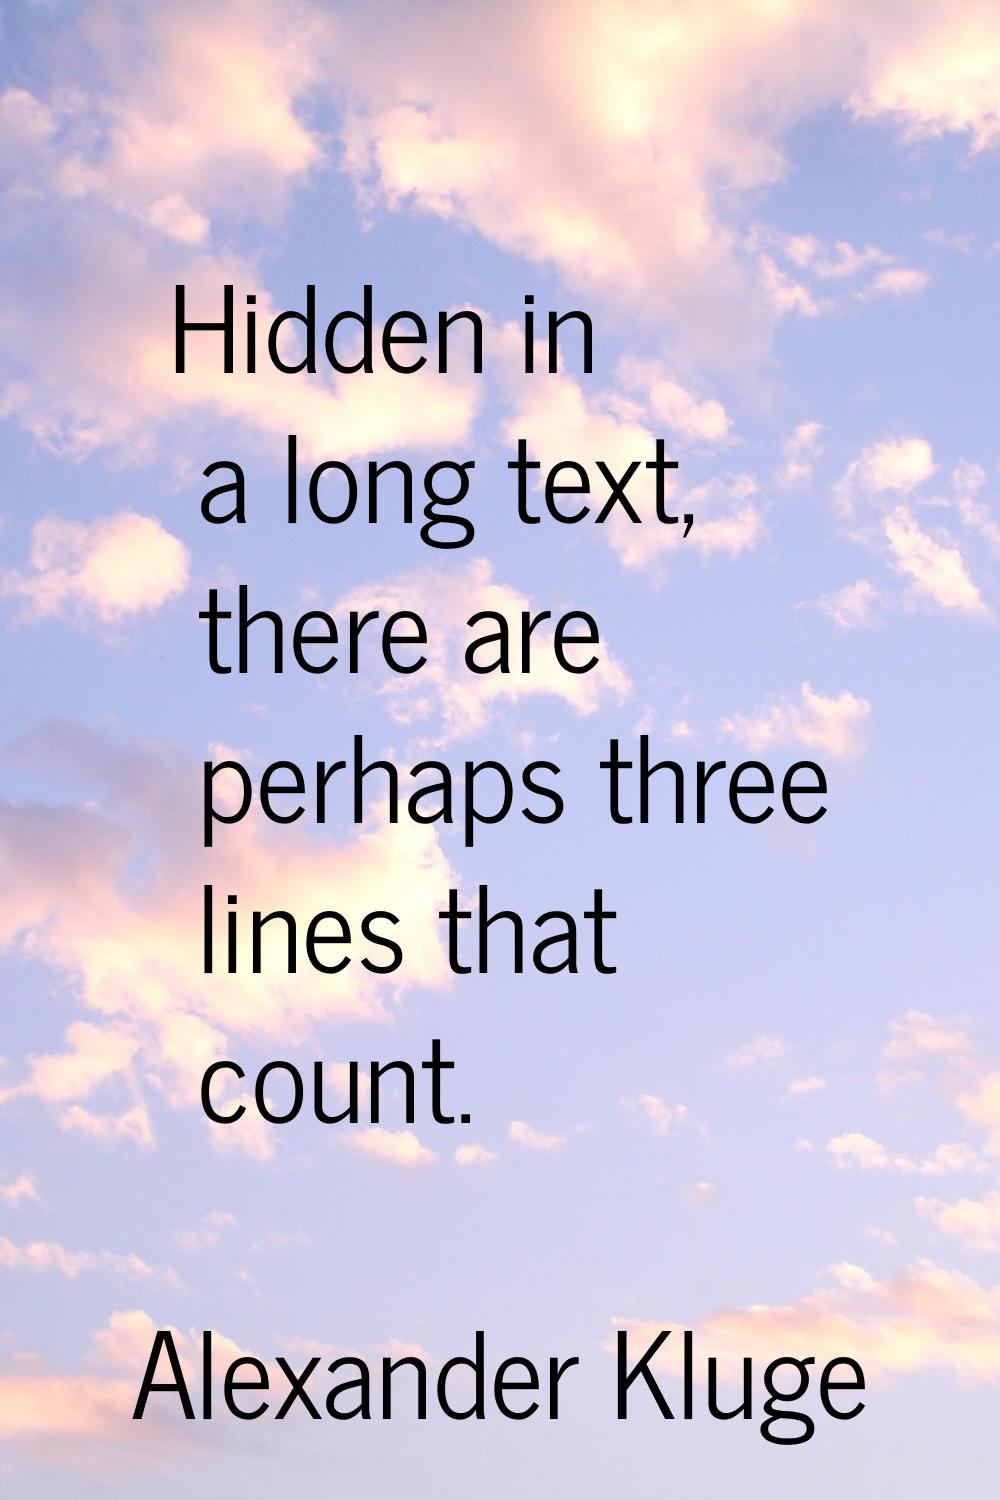 Hidden in a long text, there are perhaps three lines that count.